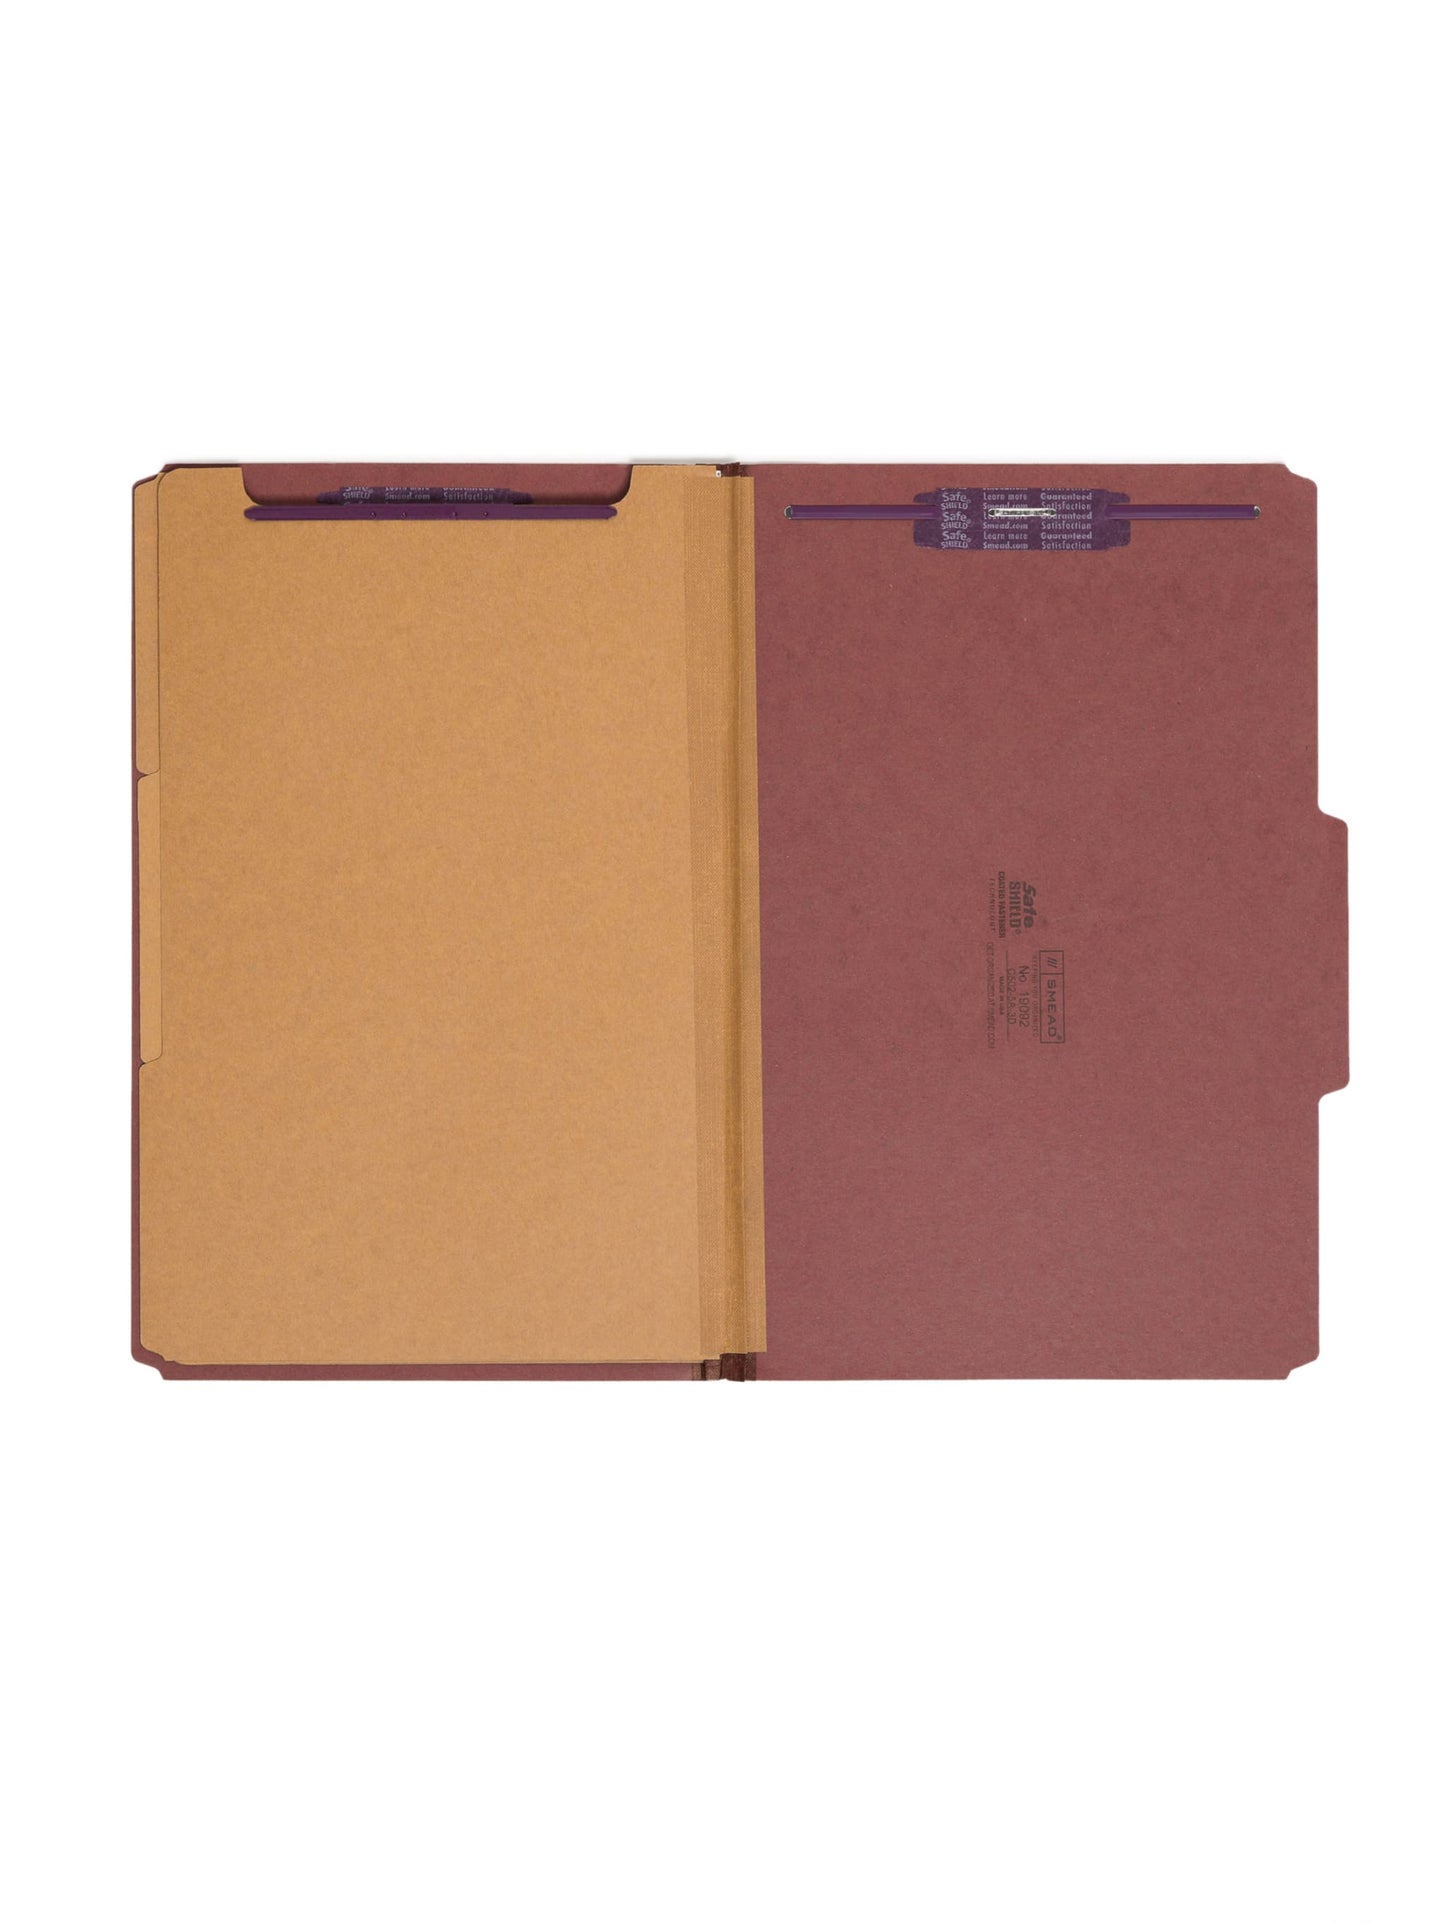 SafeSHIELD® Pressboard Classification File Folders, 3 Dividers, 3 inch Expansion, 2/5-Cut Tab, Red Color, Legal Size, Set of 0, 30086486190924